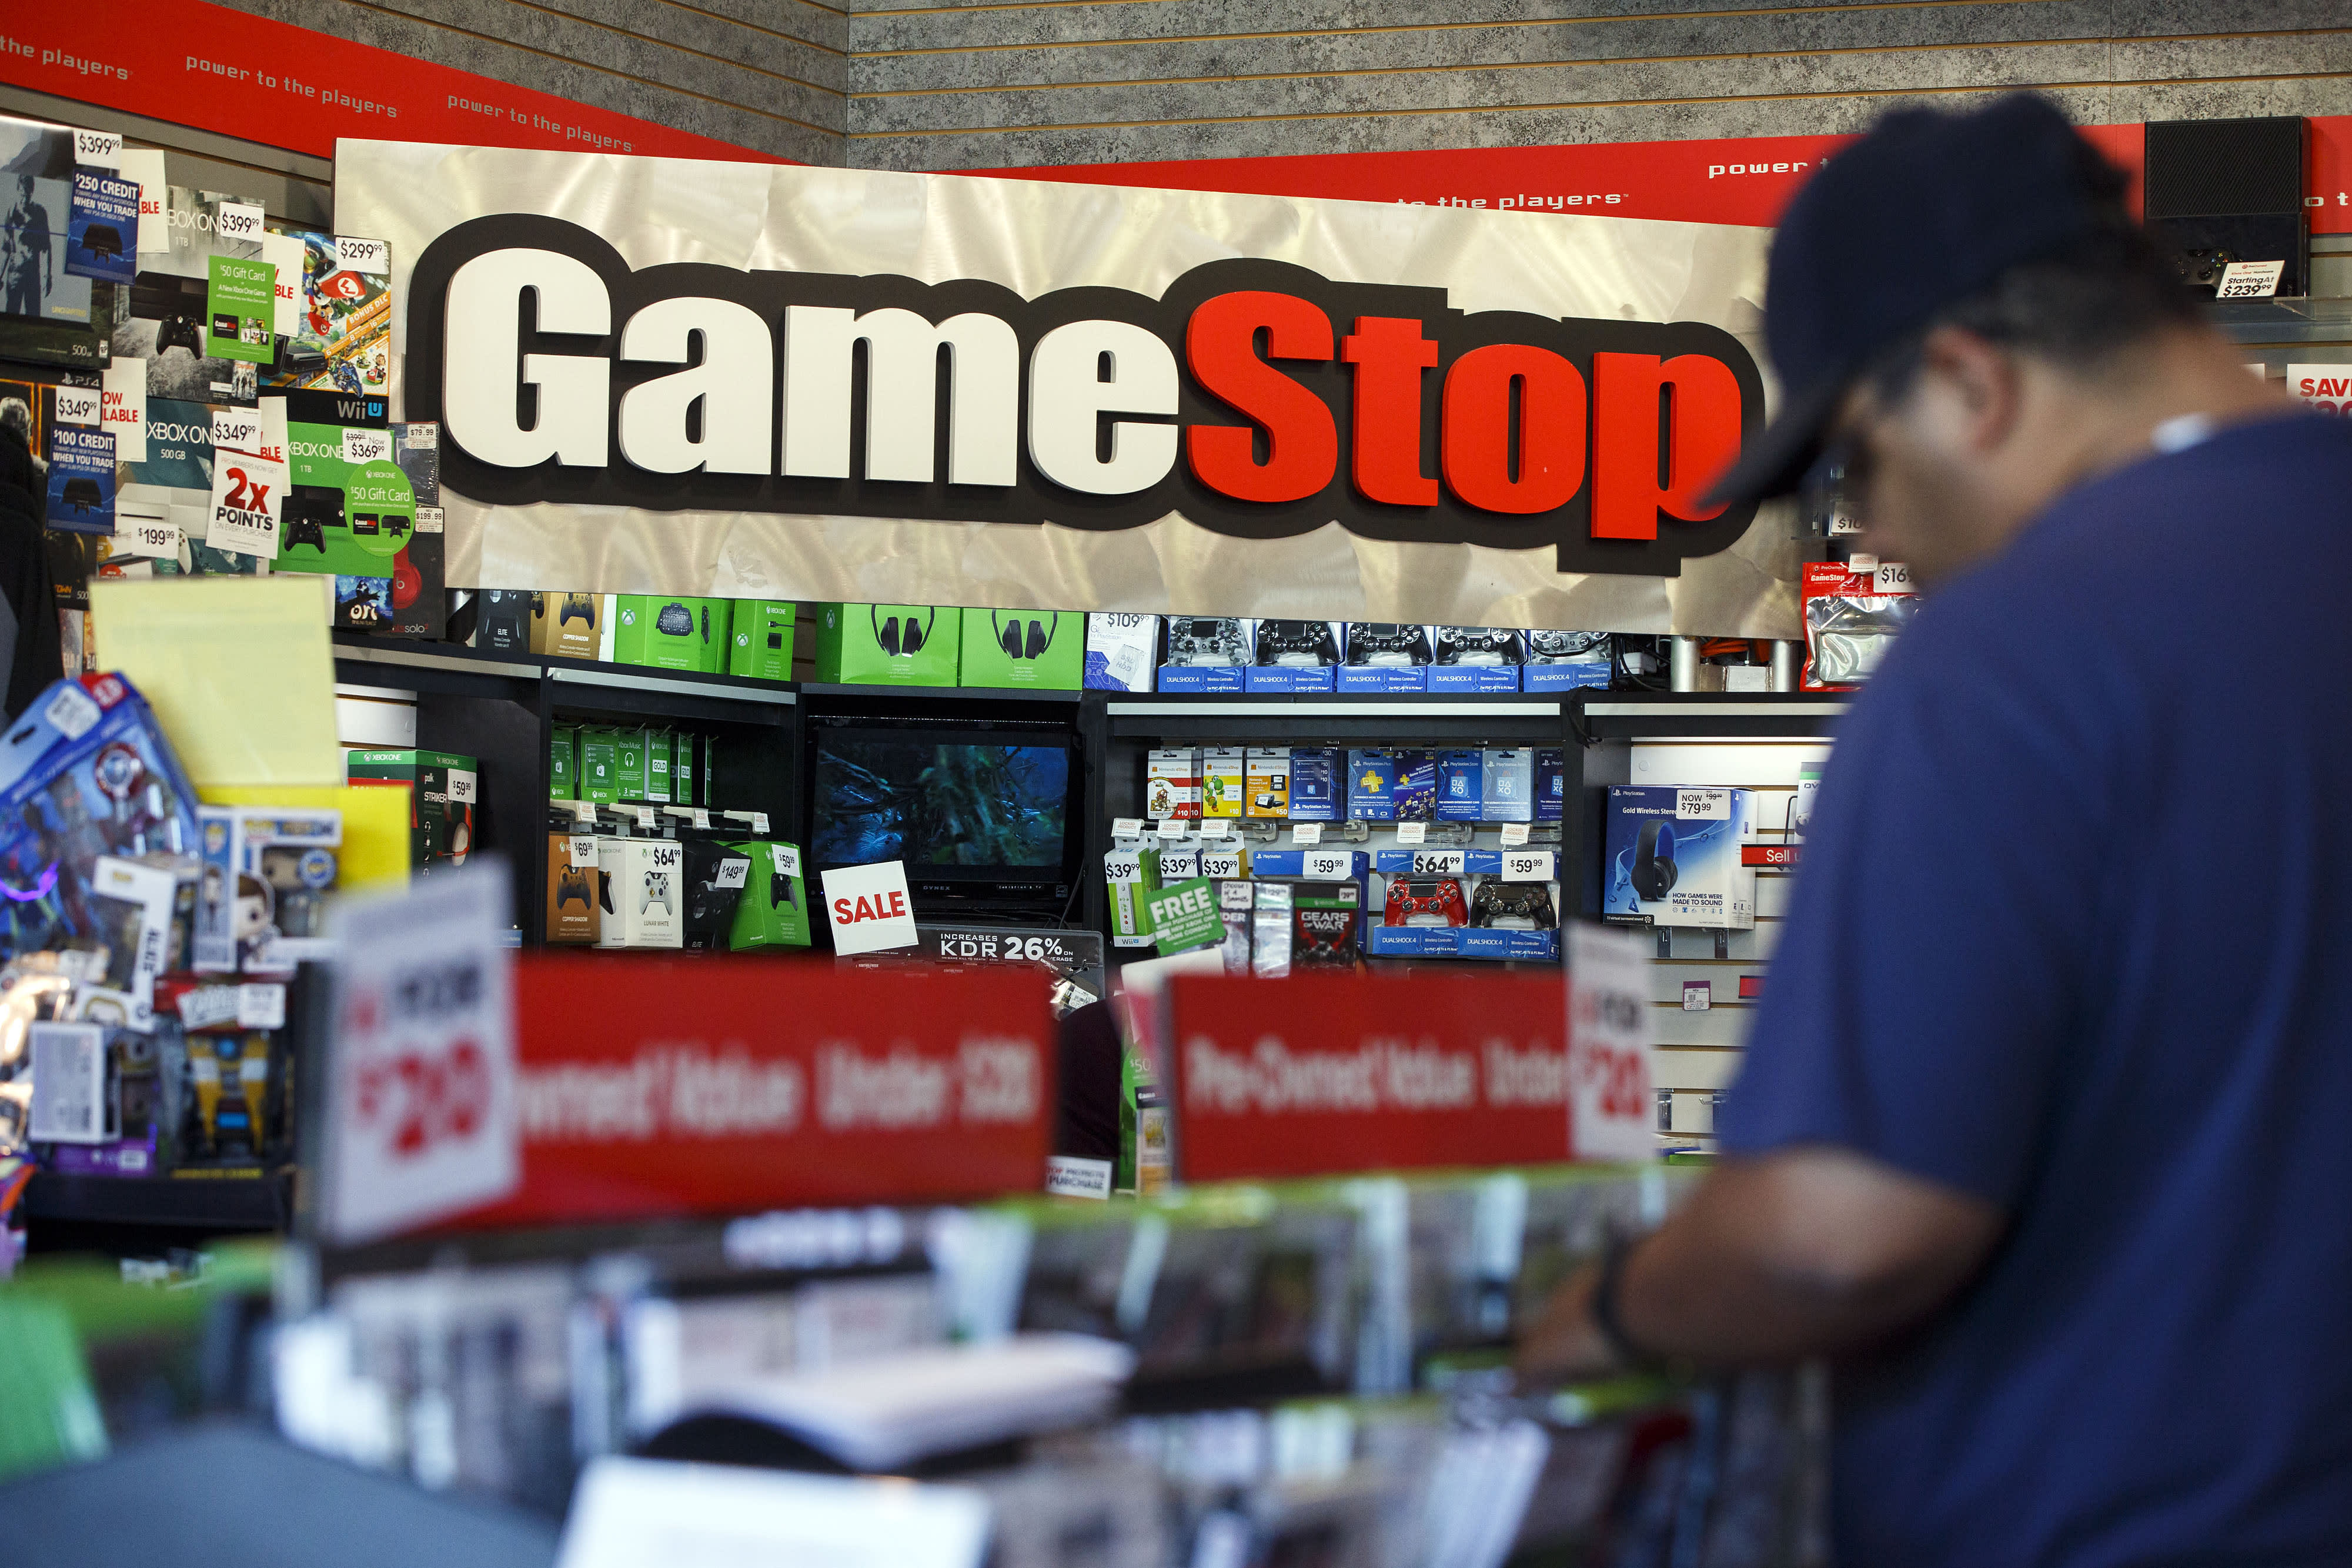 GameStop rises 100% even if hedge funds cover short bets, rally investigation intensifies